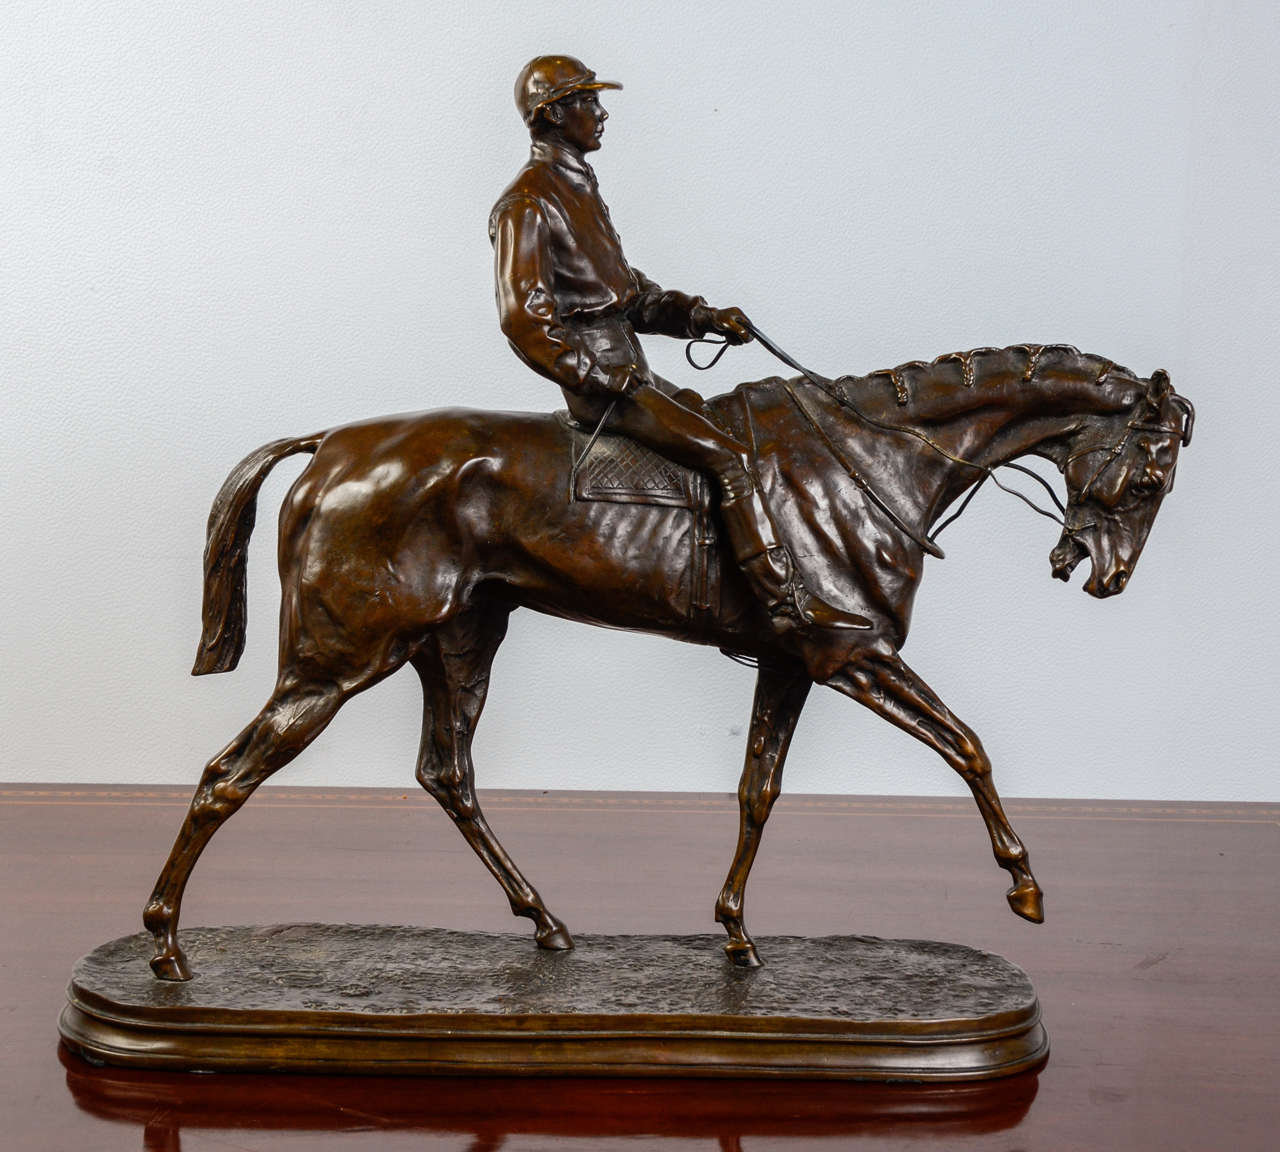 Bronze sculpture by Pierre Jules Mene (1810-1879).

'Jockey on his Horse.'

Bronze with brown patina.
Signed and dated 1863. 
Not any lost wax mark.
Dimension: 41 cm x 41 cm x 14 cm.